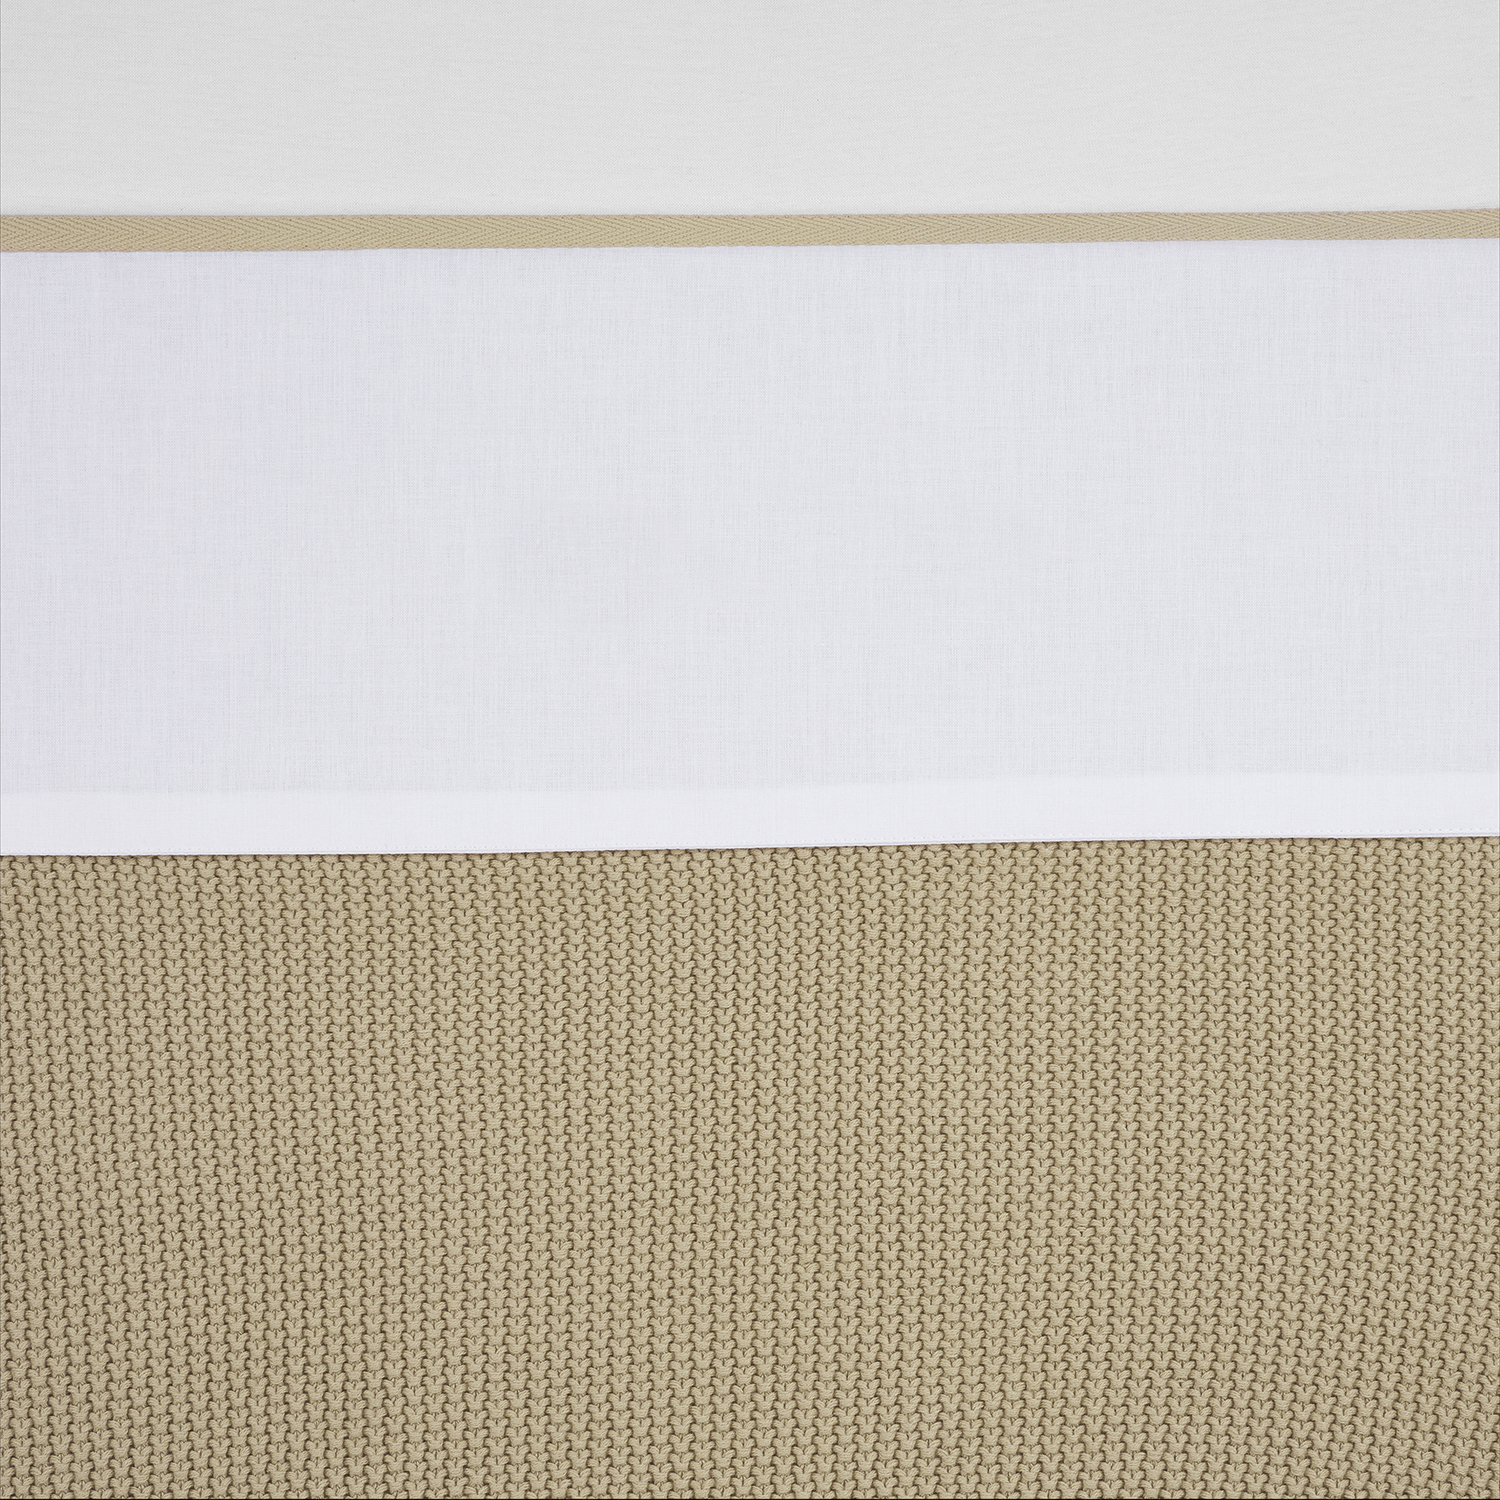 Cot Bed Sheet Piping - Sand - 100x150cm